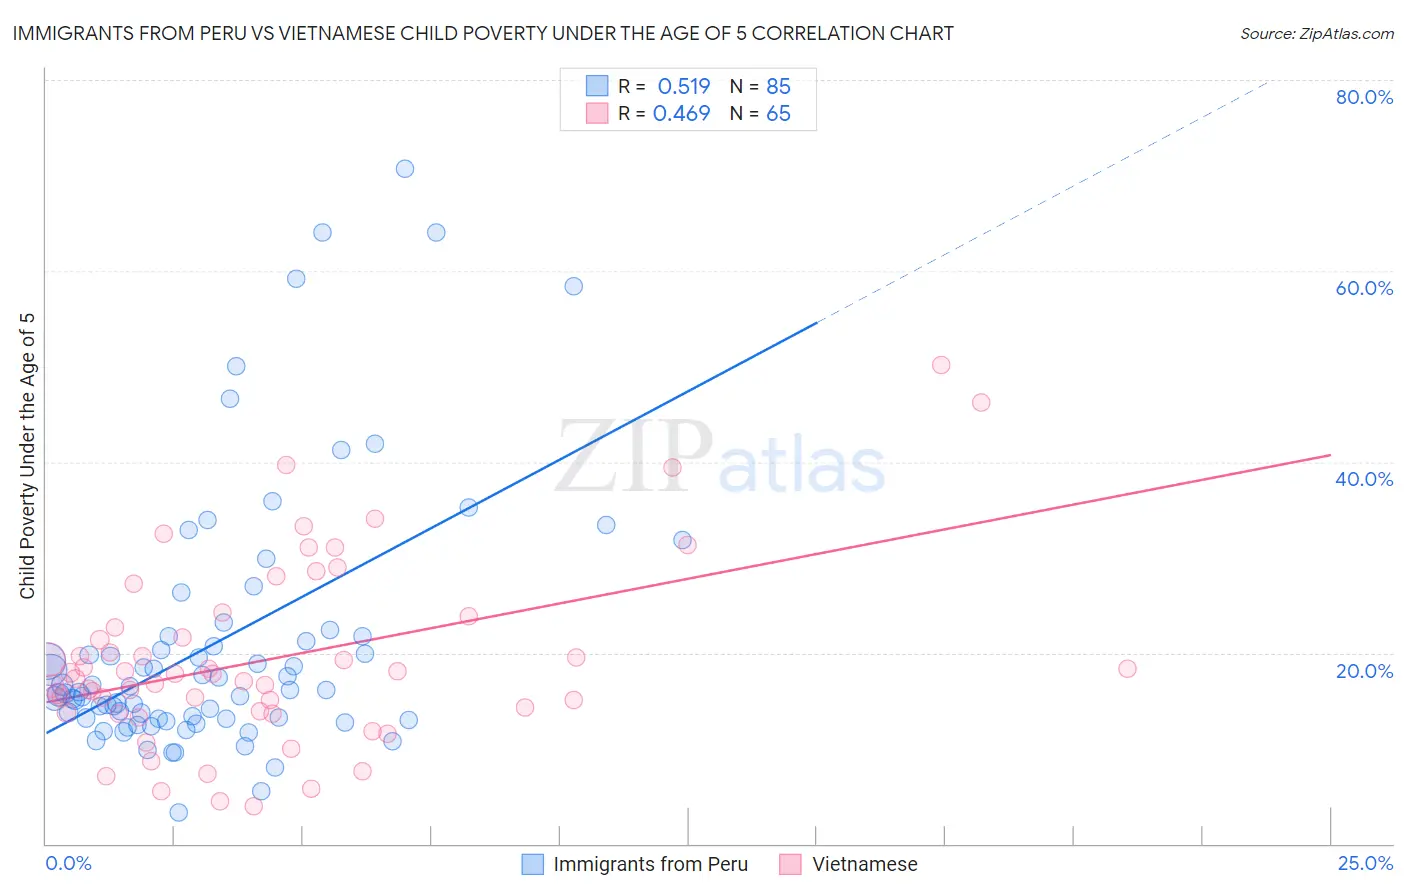 Immigrants from Peru vs Vietnamese Child Poverty Under the Age of 5